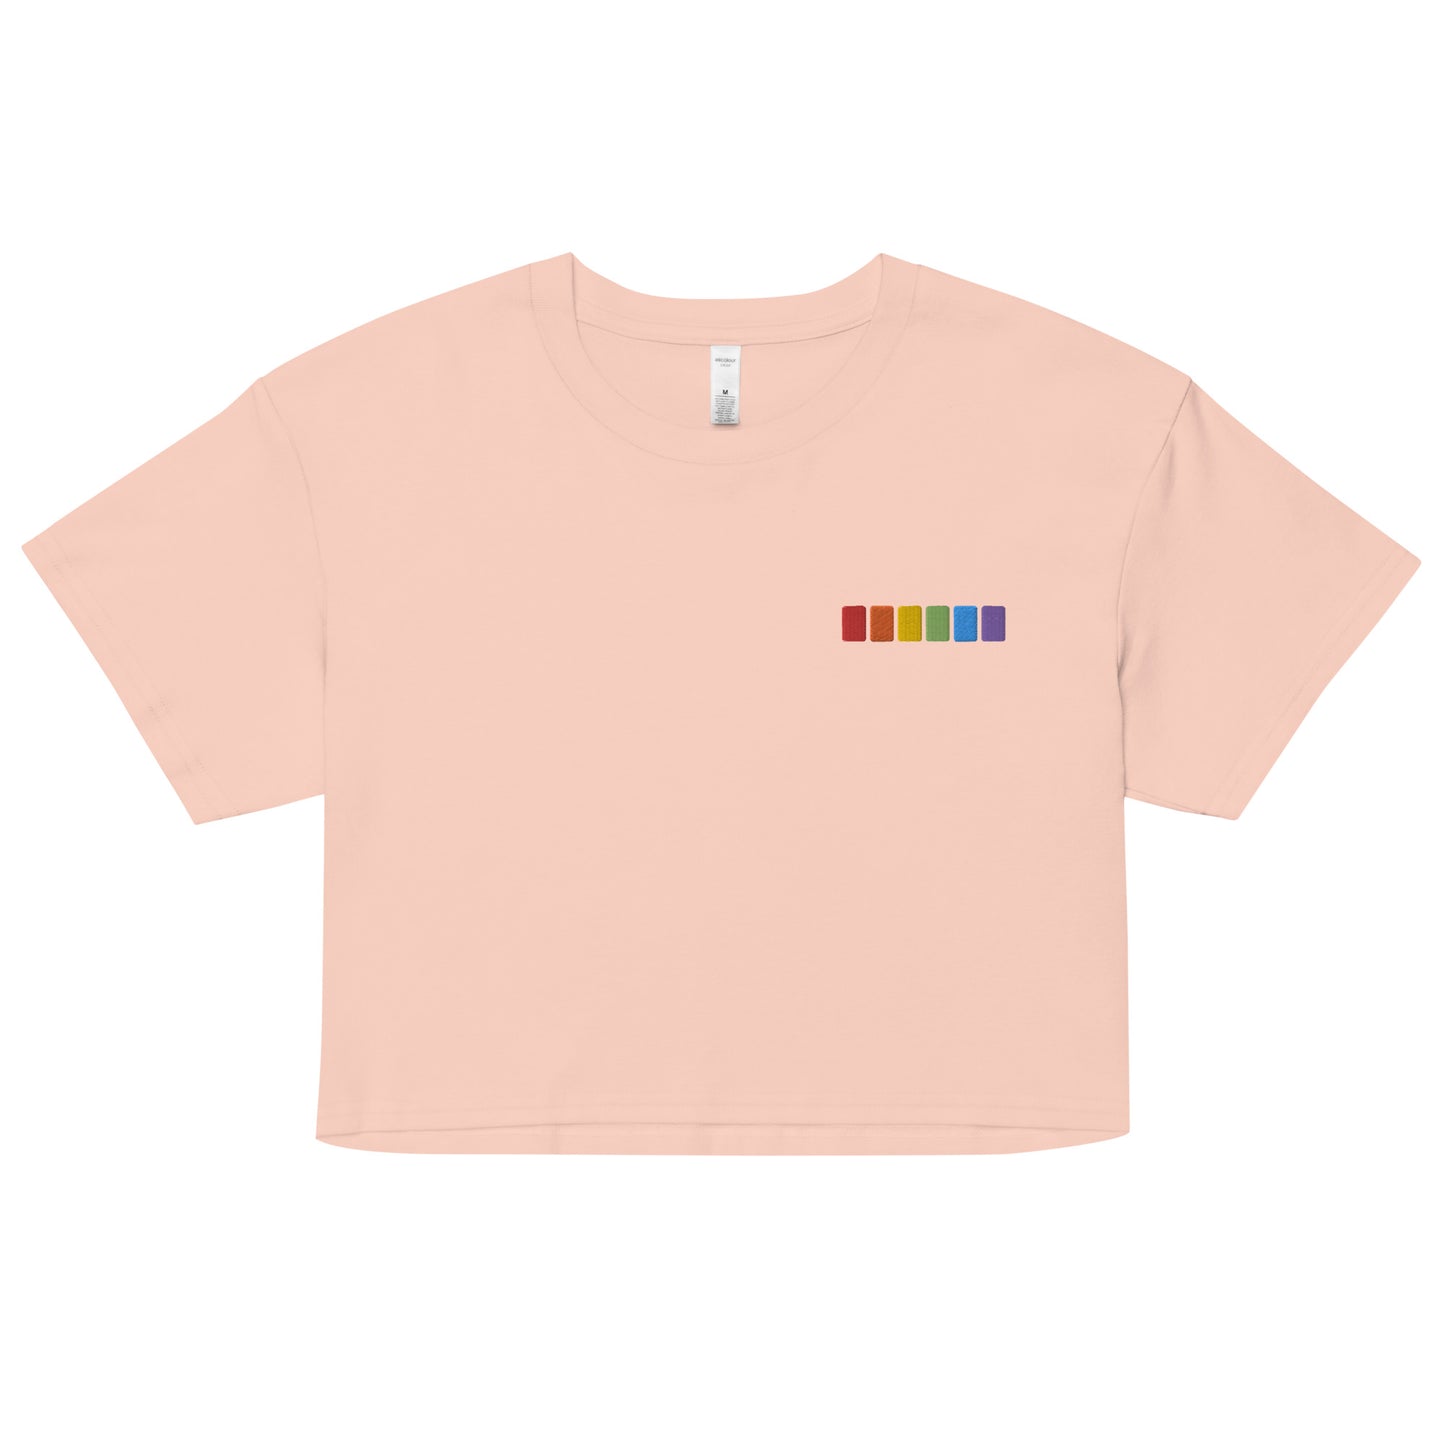 A relaxed, modest pale pink crop top features a subtle rainbow squares embroidery. Adding a touch of rainbow to your look—a playful celebration of lgbtq culture! Made from 100% combed cotton. Available in Extra Small, Small, Medium, Large, Extra Large.